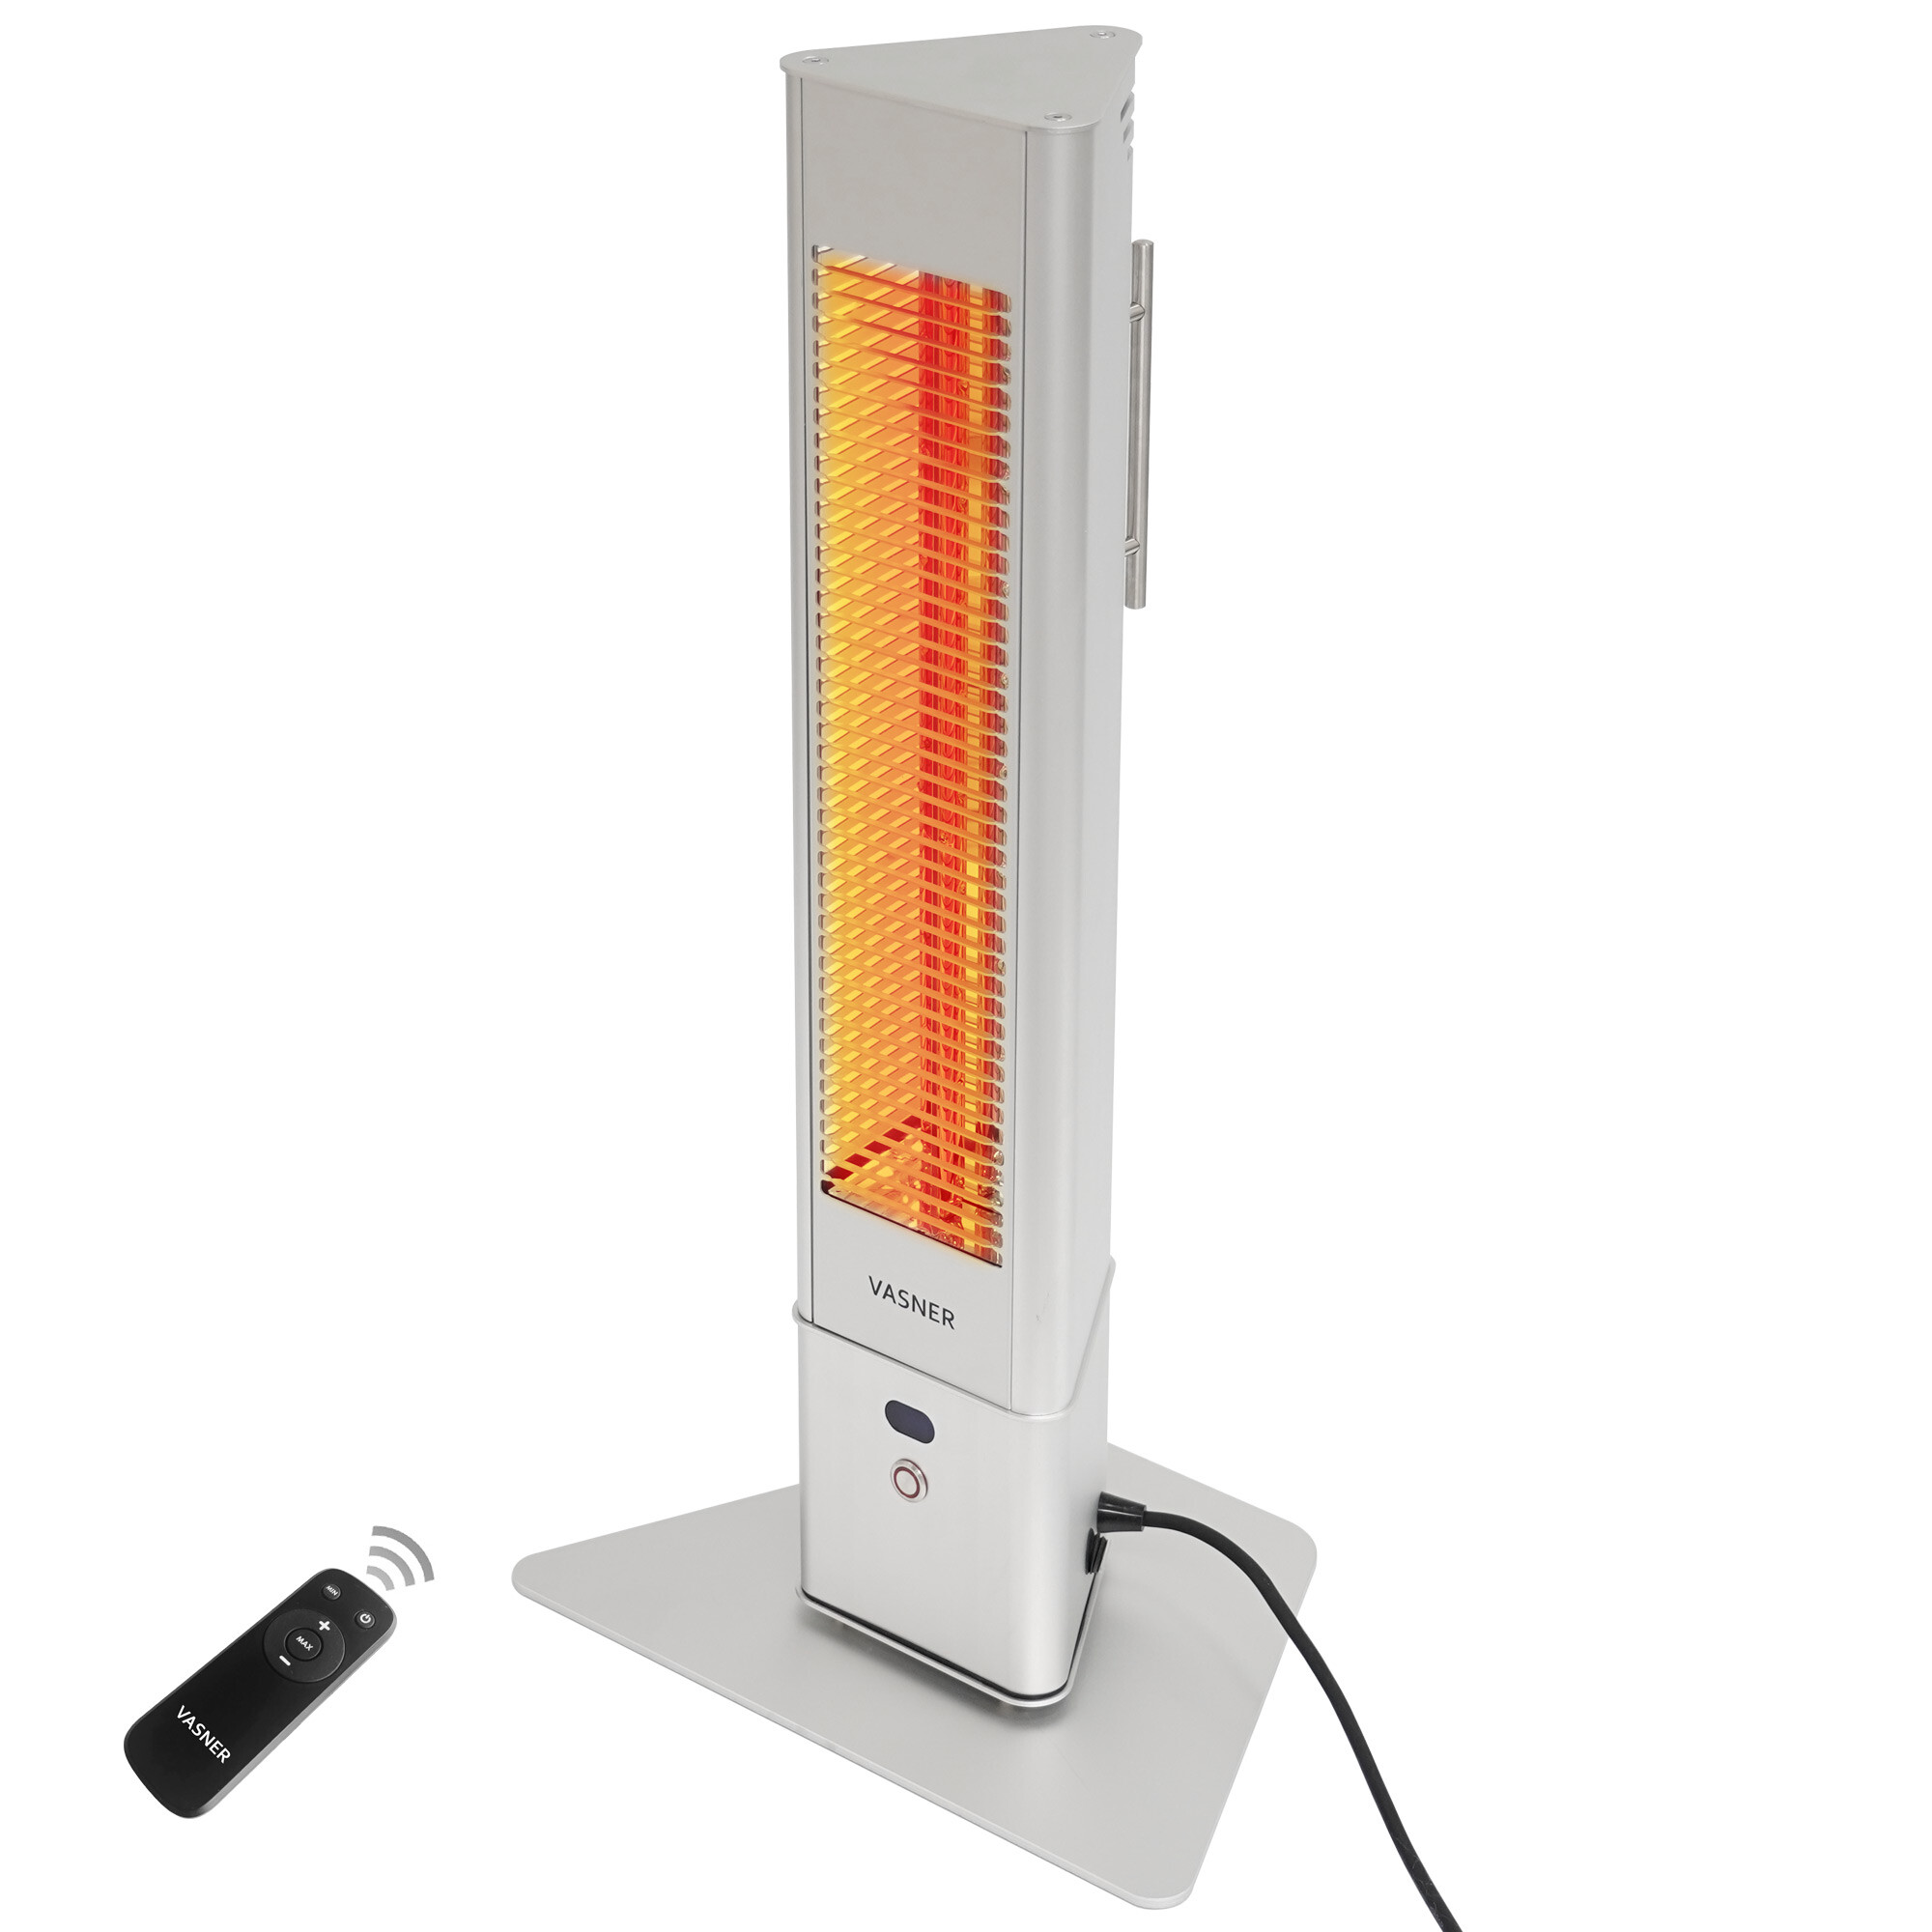 Portable outdoor heater in silver for more elegance